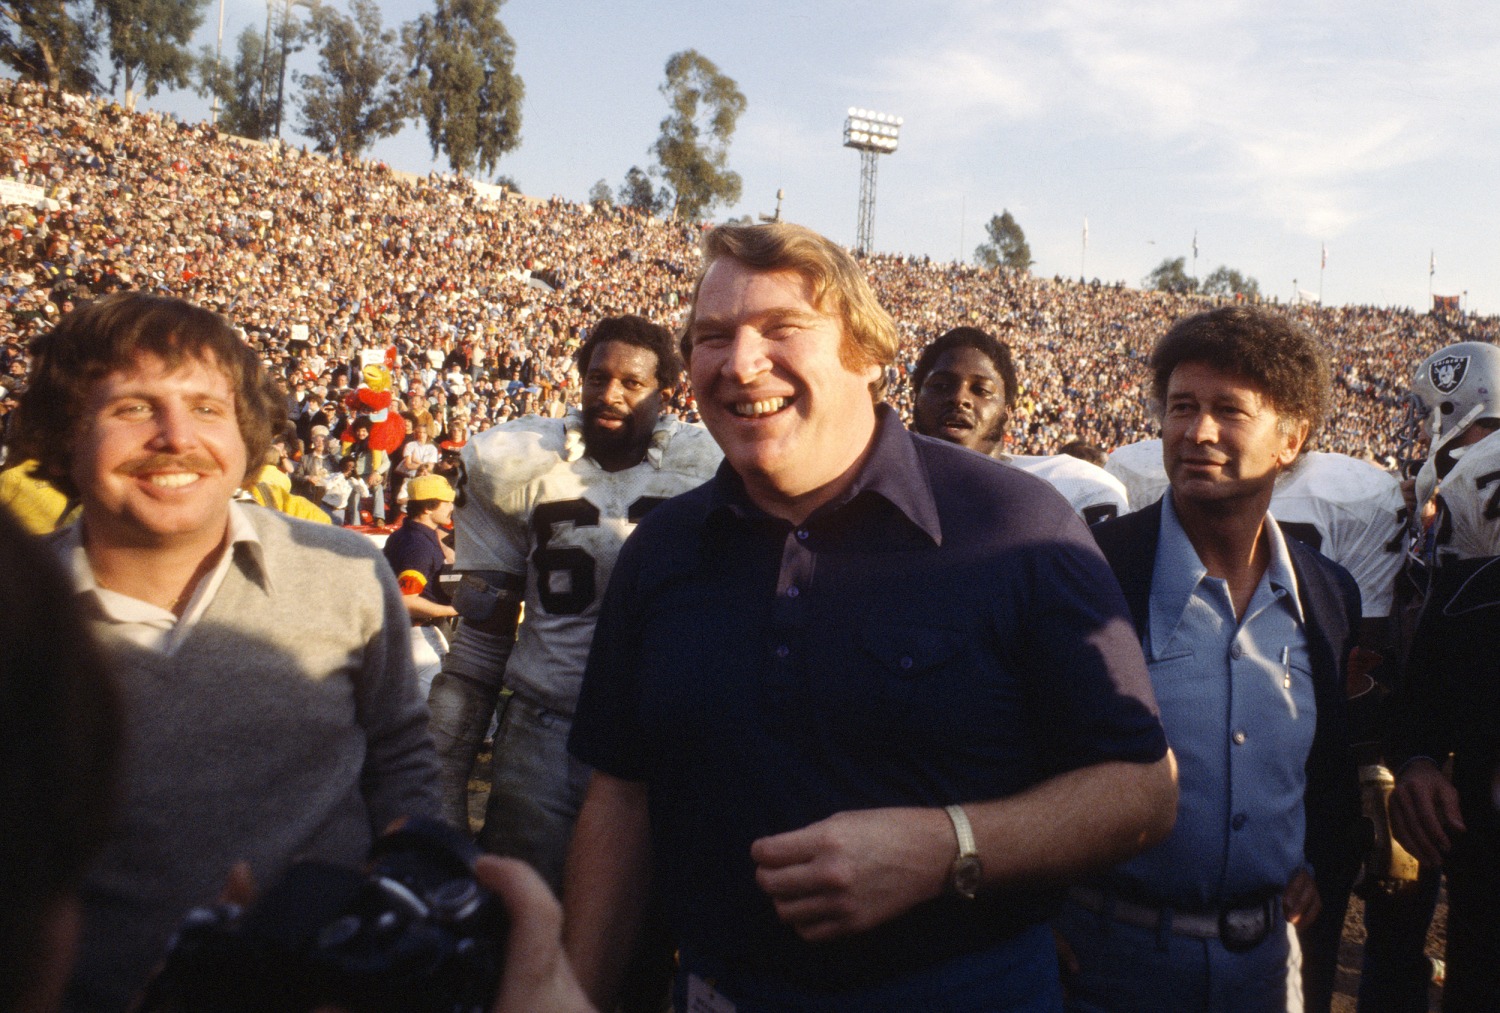 John Madden, NFL and broadcasting legend, dies at 85, Sports